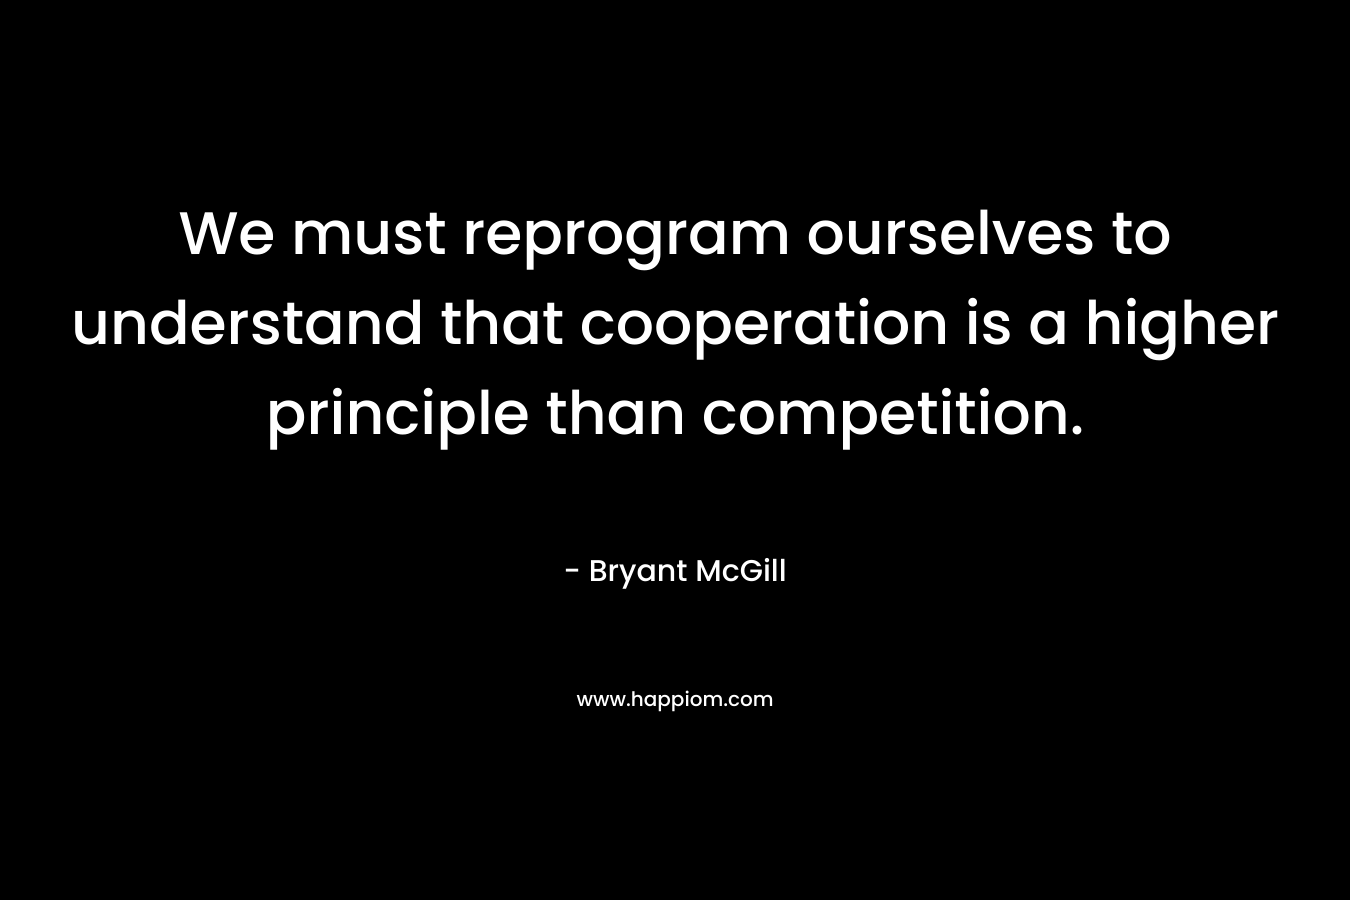 We must reprogram ourselves to understand that cooperation is a higher principle than competition. – Bryant McGill